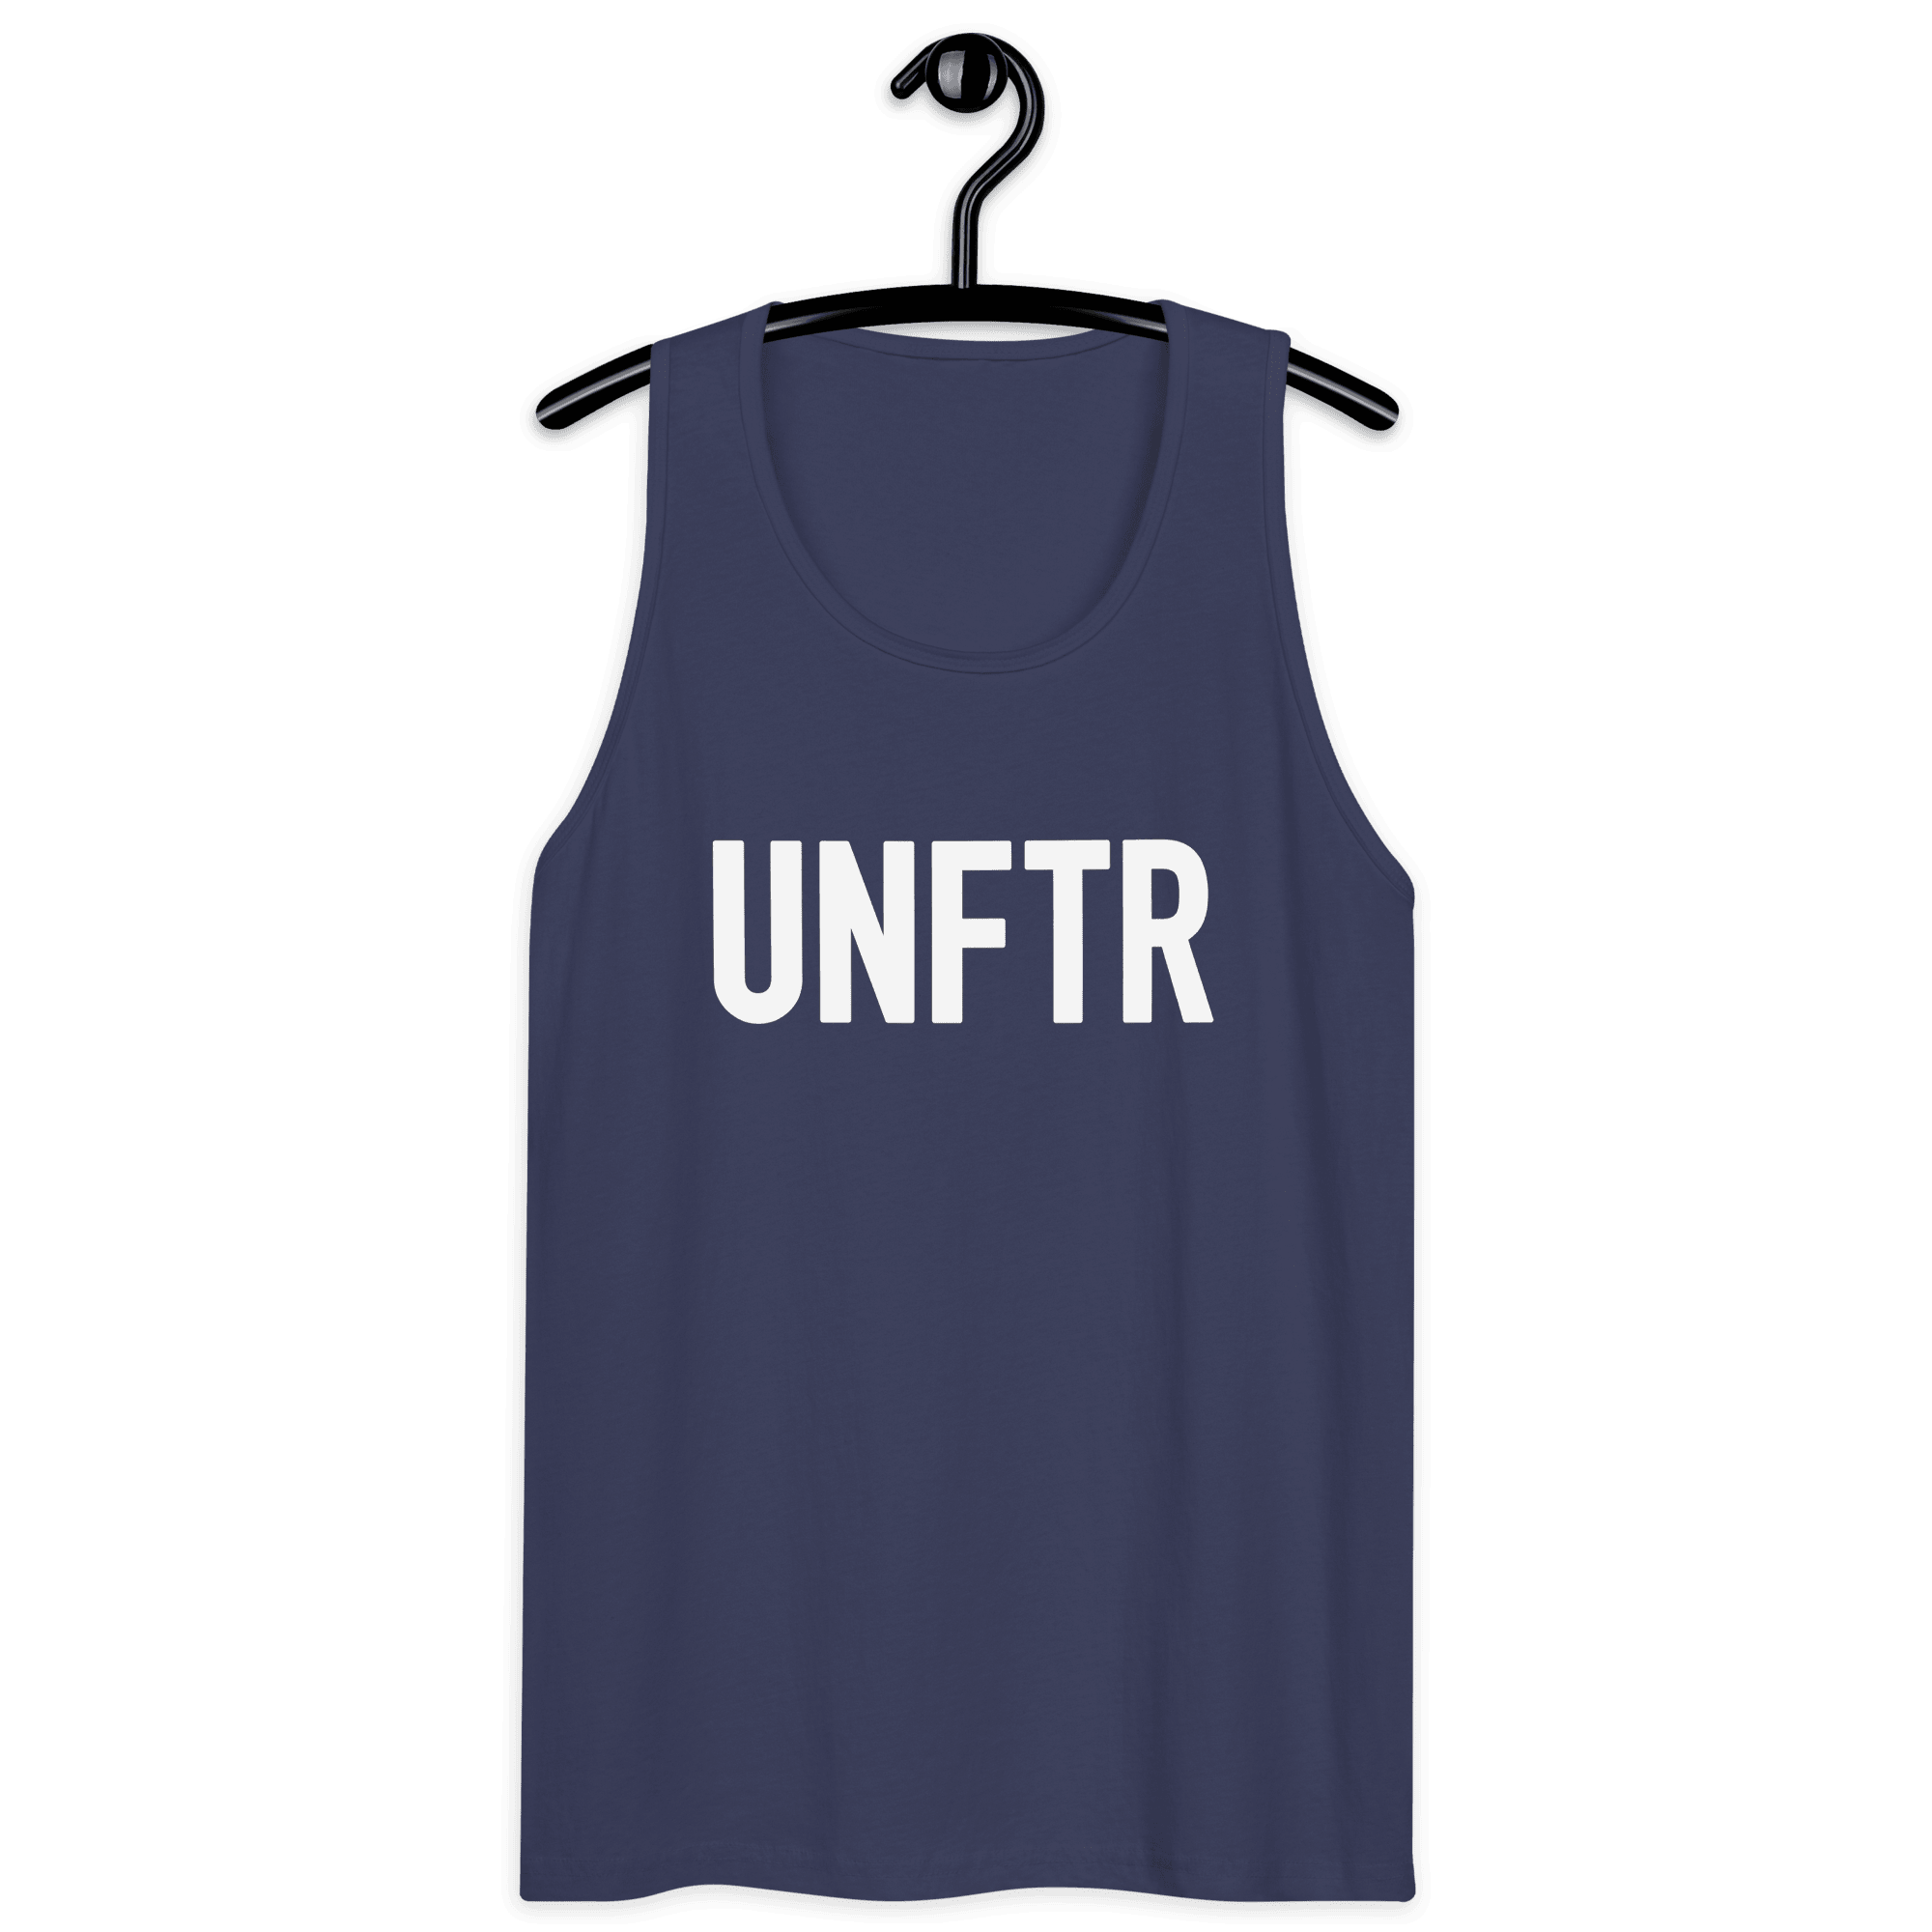 Classic Tank top in navy with white UNFTR logo on the chest-1